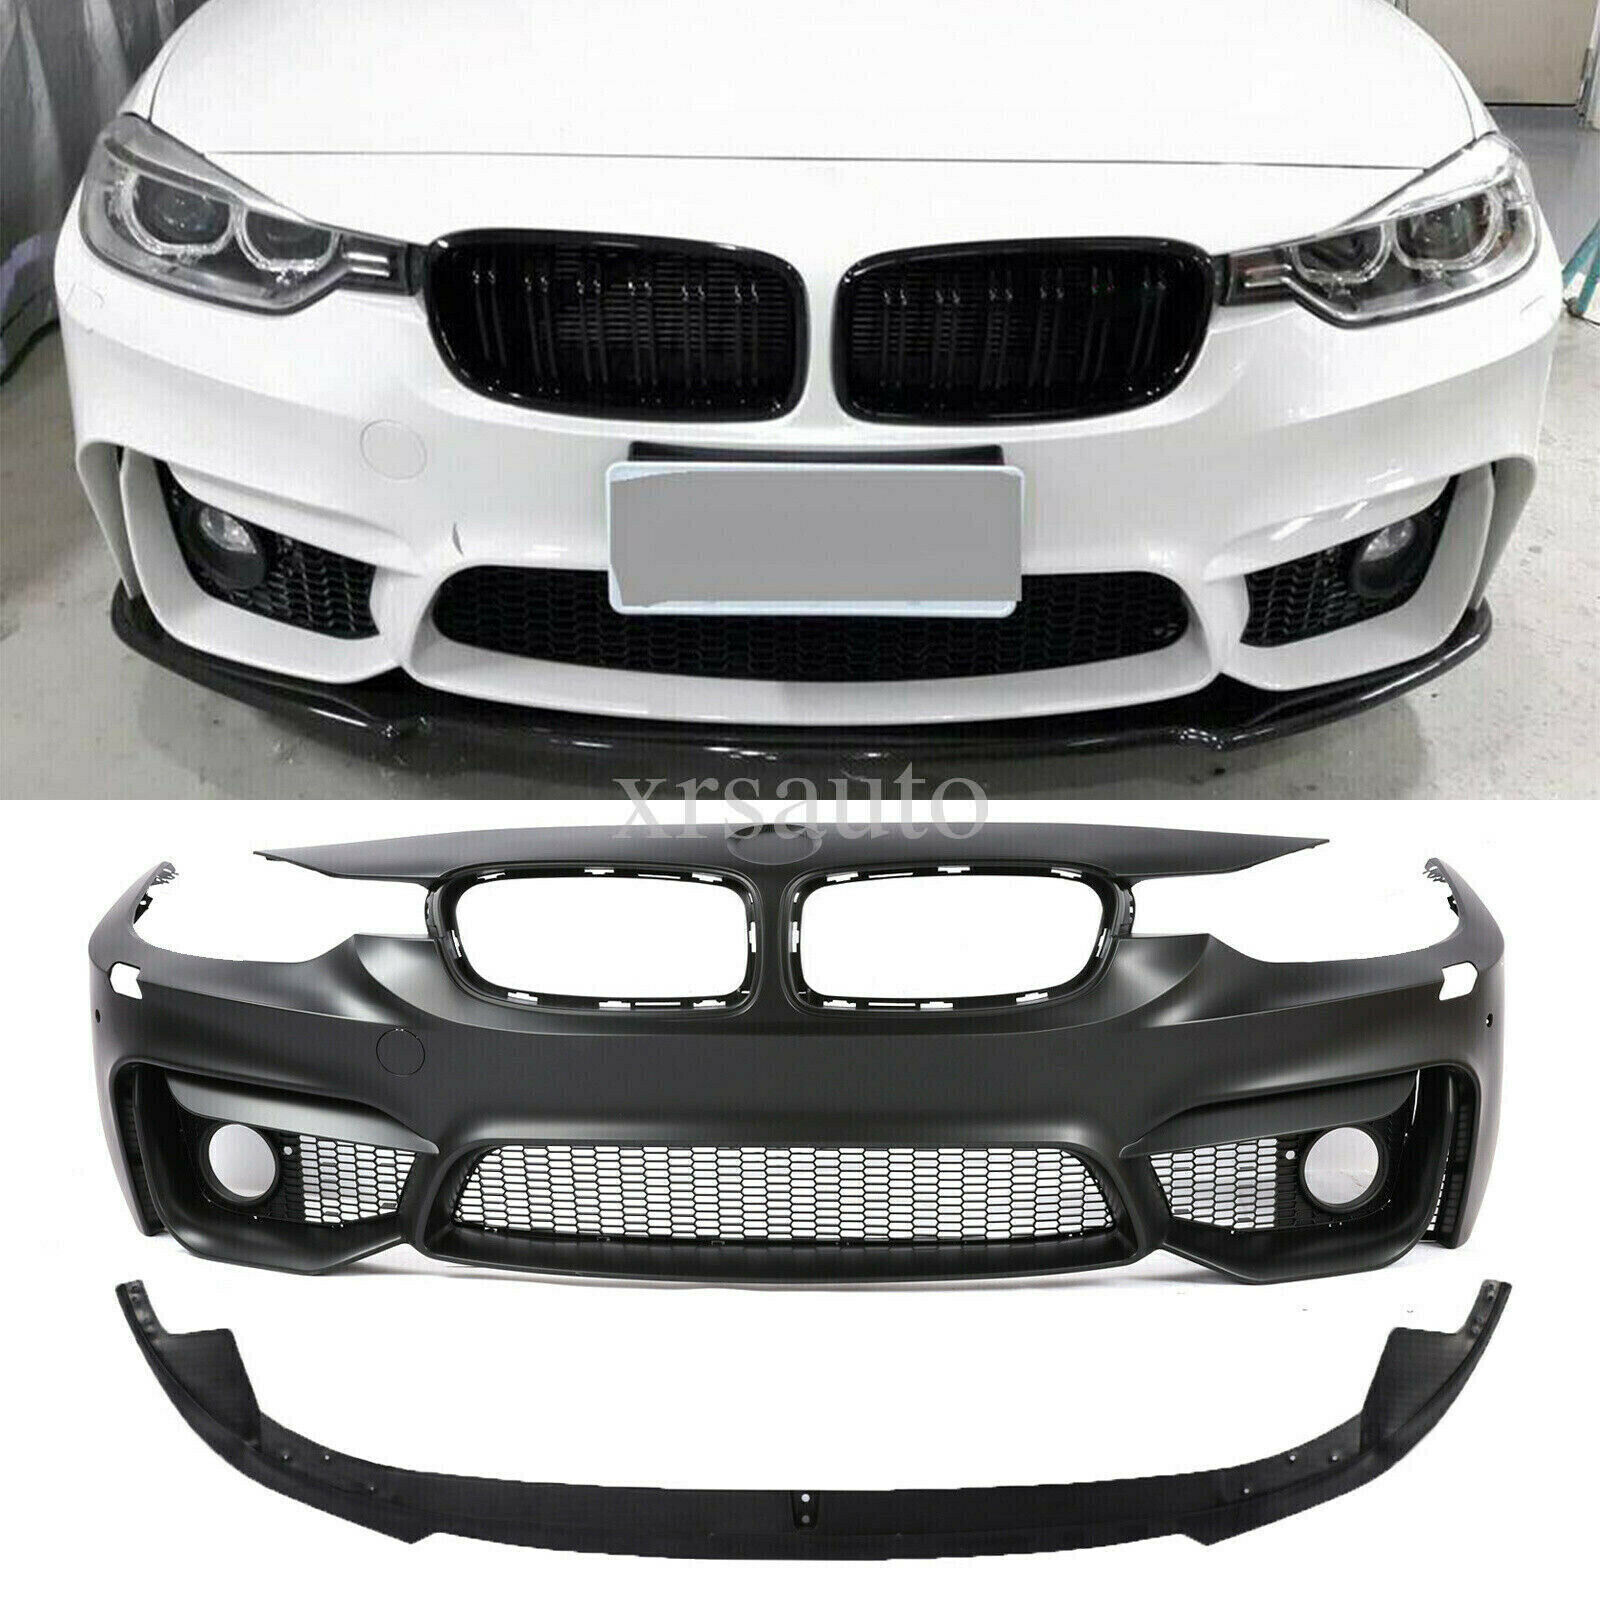 2012-18 F80 M3 Style Font Bumper FOR BMW F30 F31 3 SERIES W/O PDC Holes